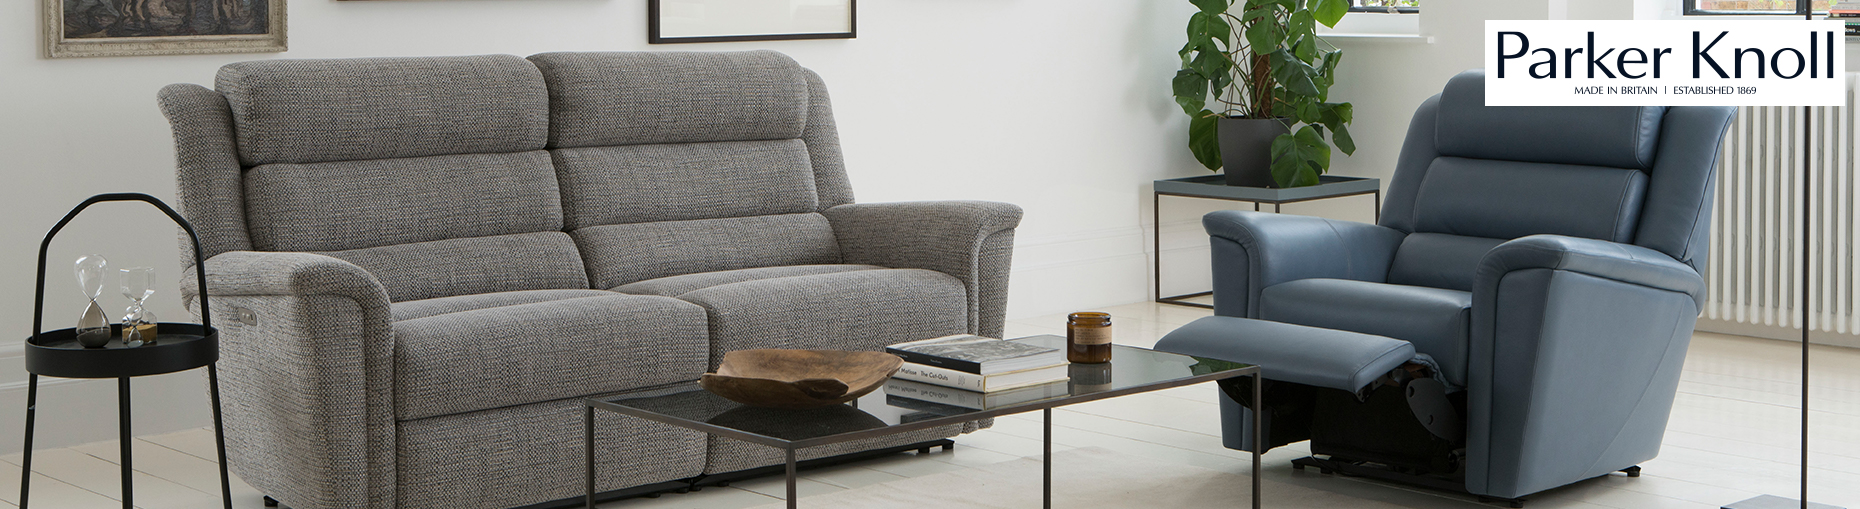 Parker Knoll Colorado Sofa collection at Forrest Furnishing